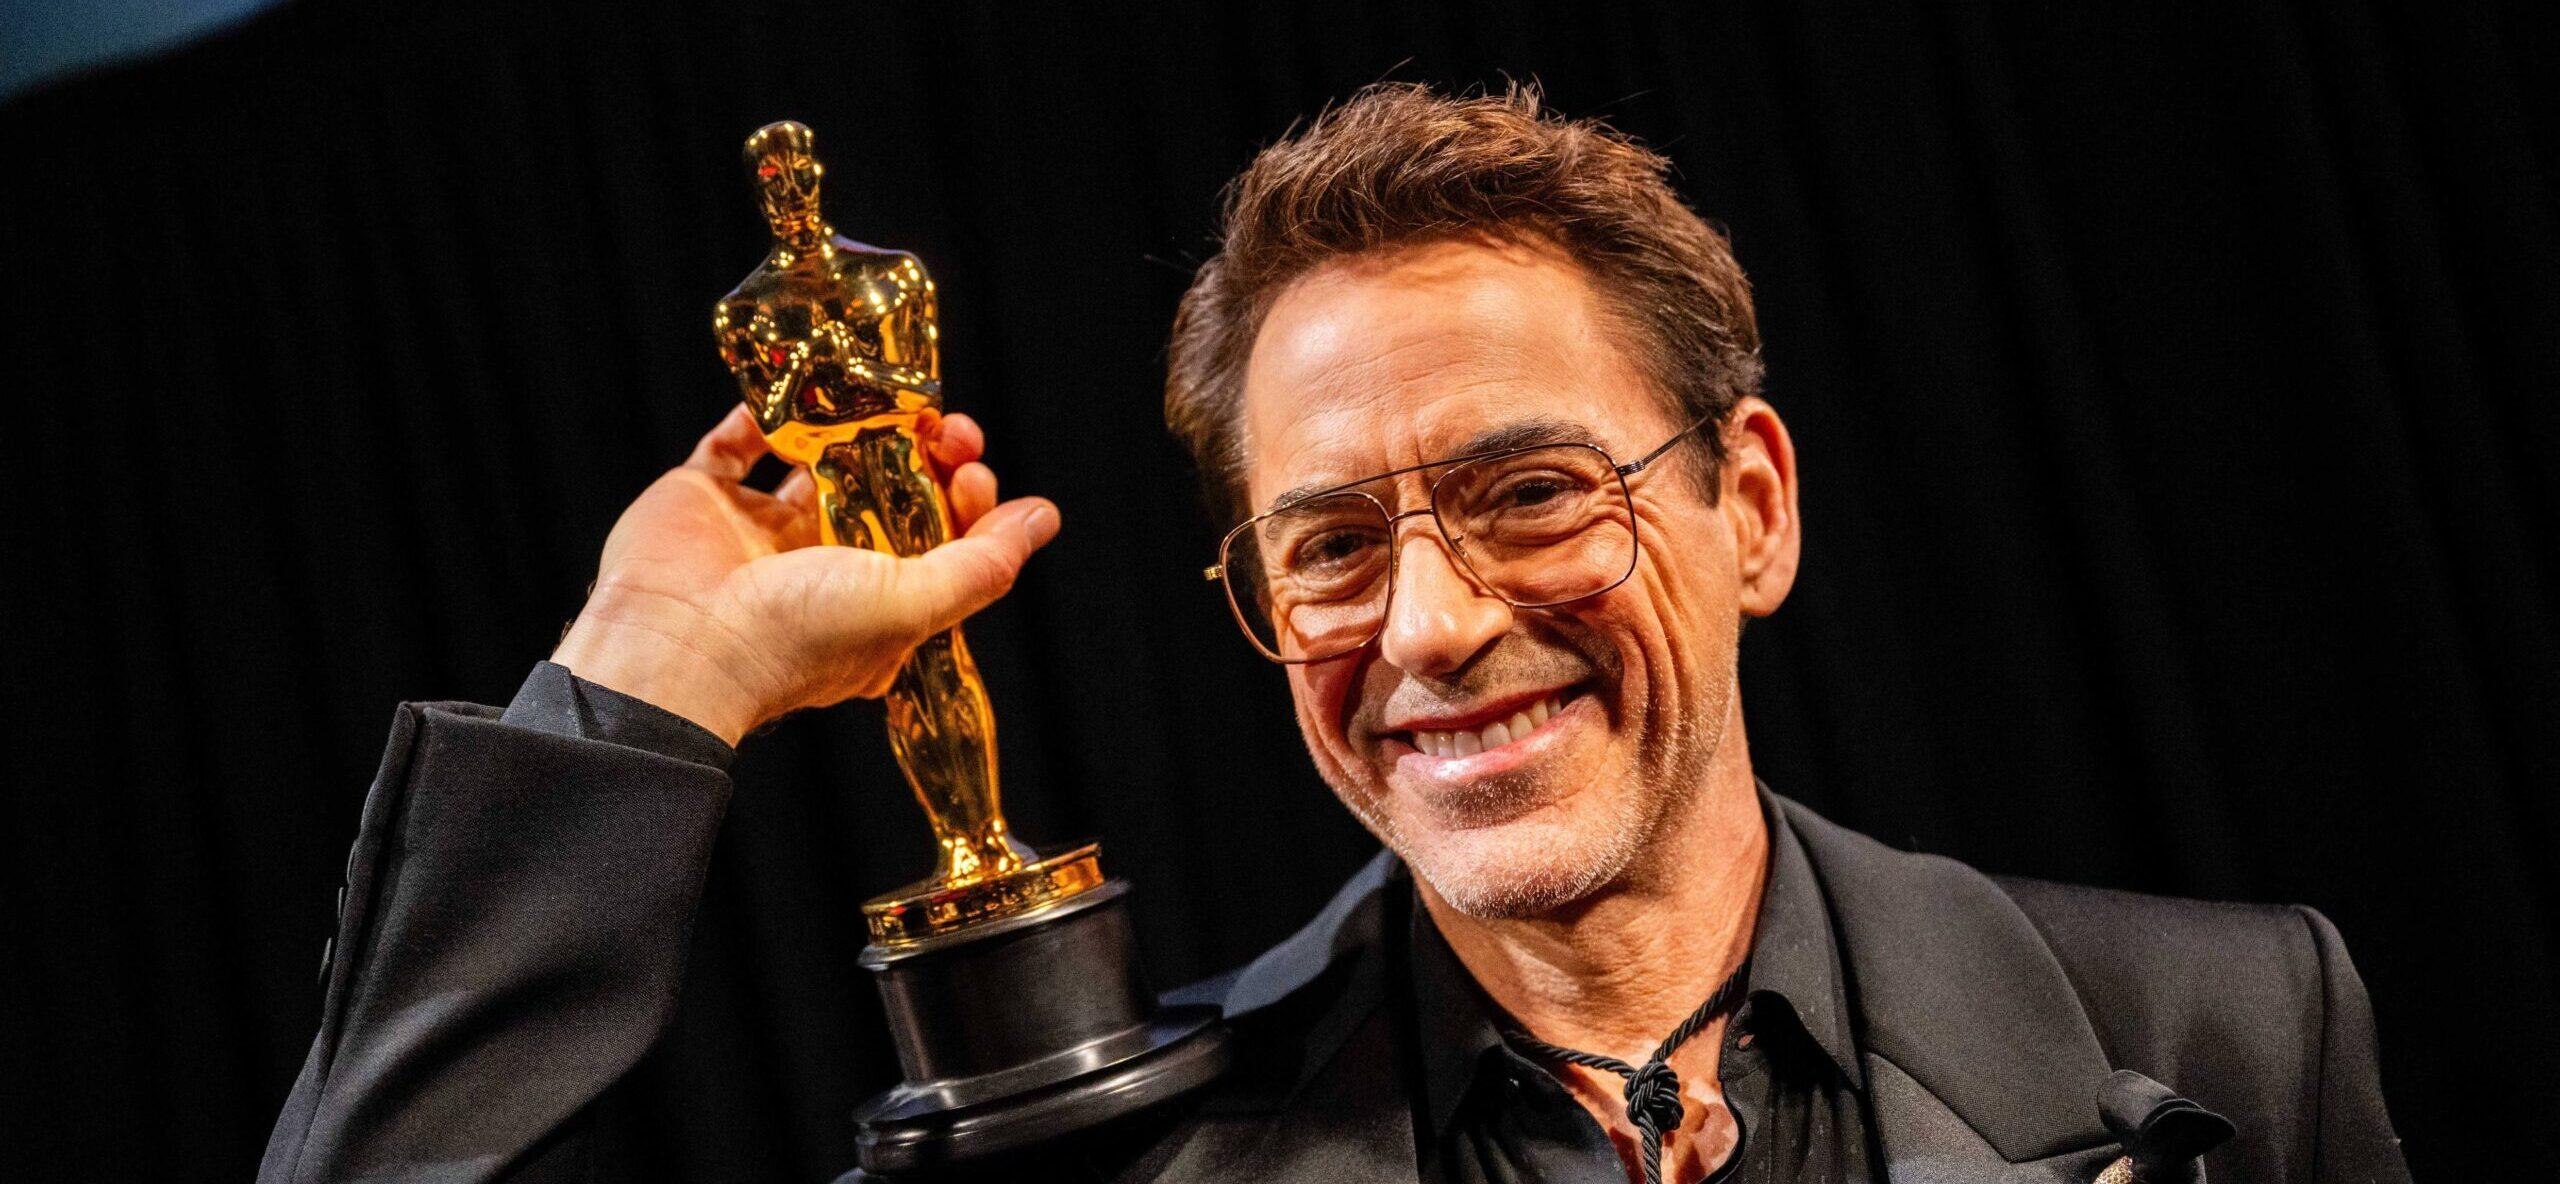 Robert Downey Jr. To Make His Broadway Debut Following First Oscars Win